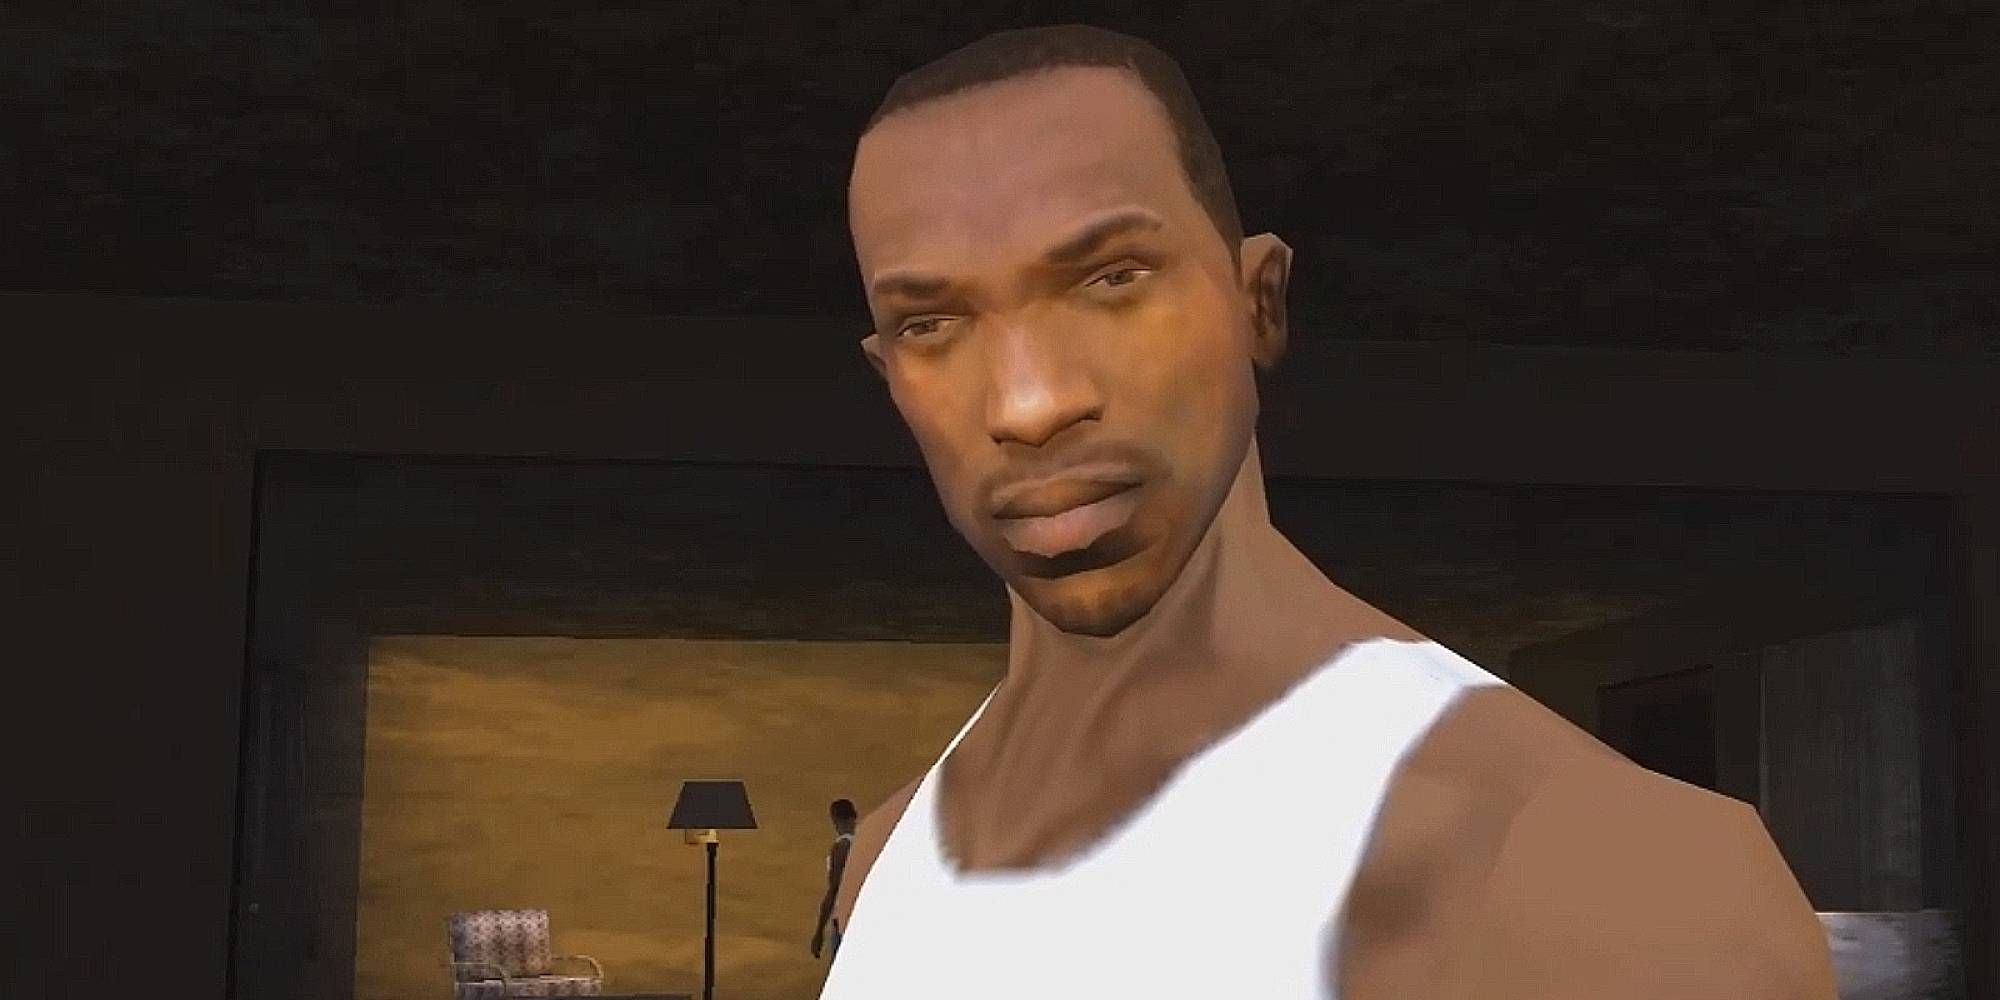 Carl Johnson from Grand Theft Auto: San Andreas stands in a small living room